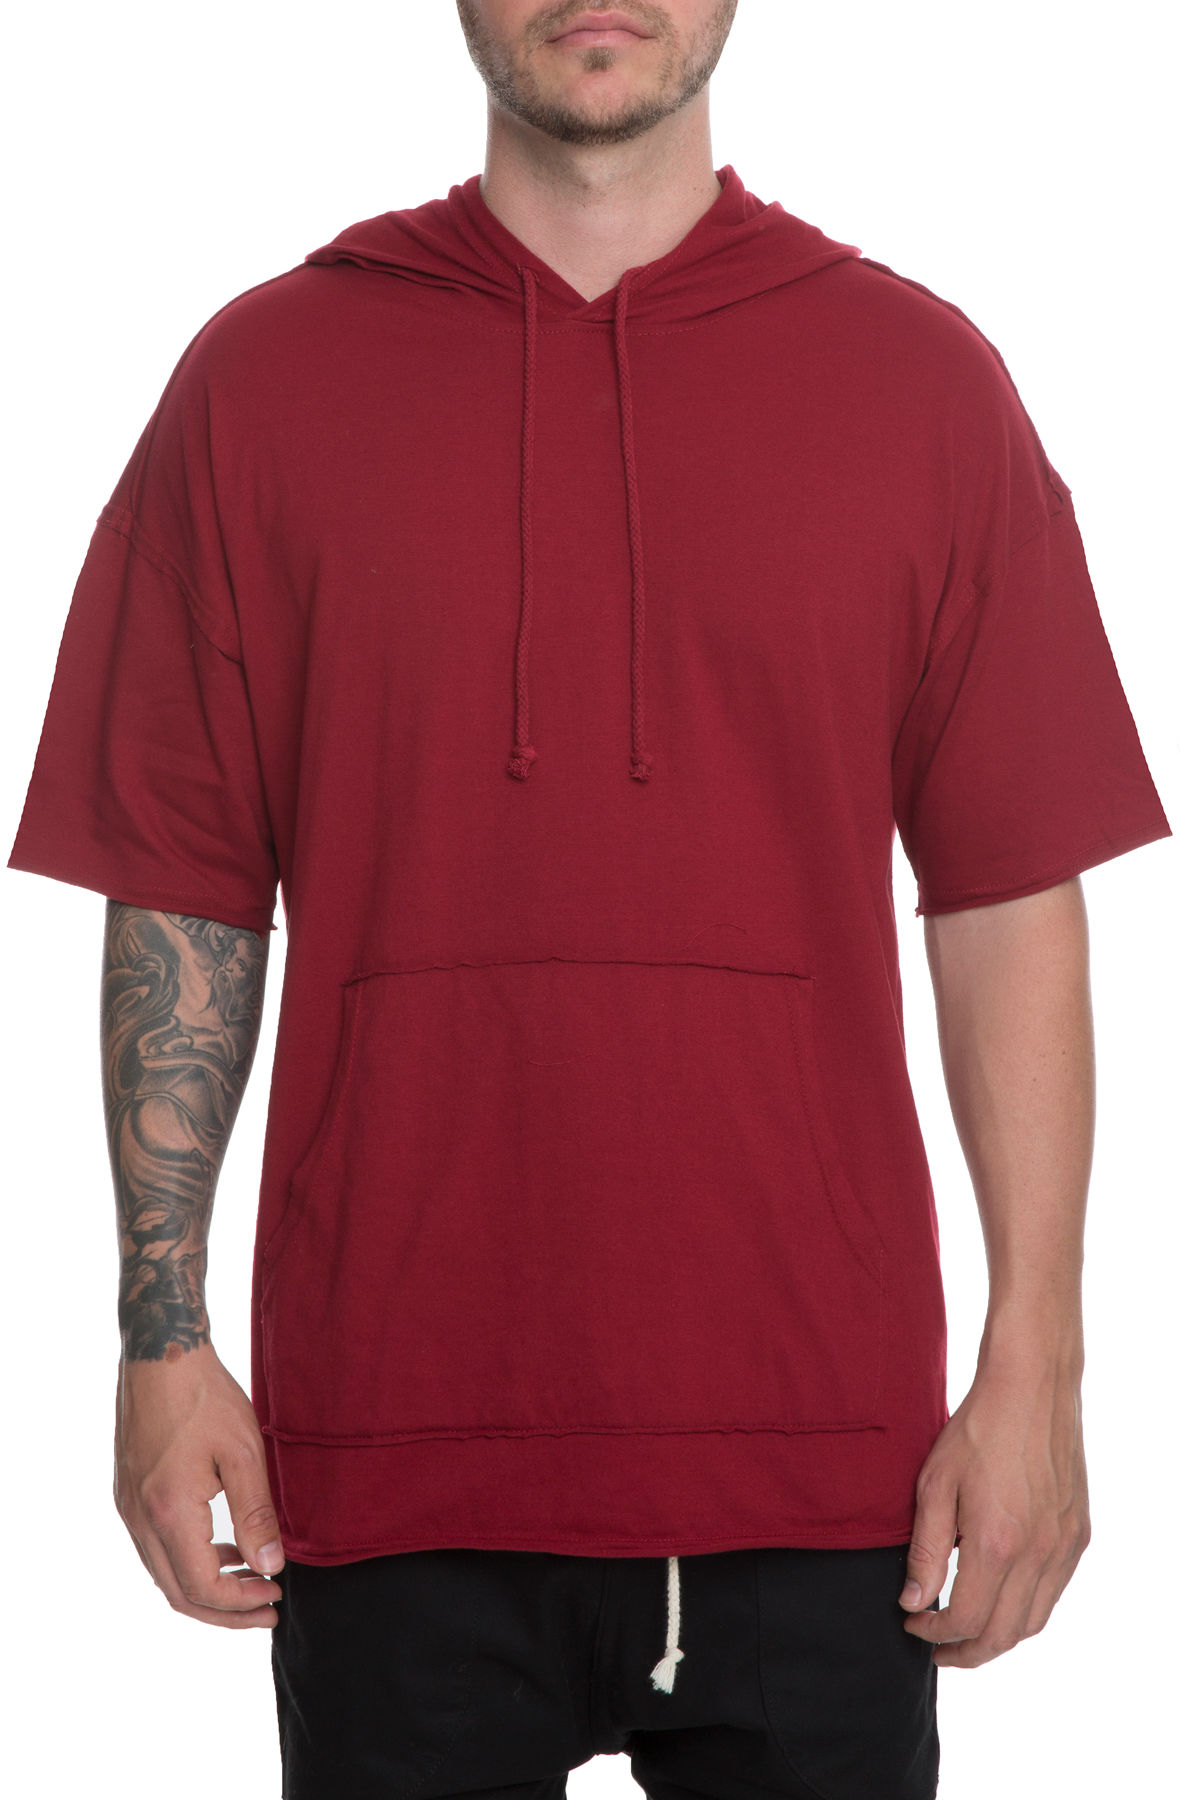 The Dropoff Pull Over Short Sleeve Hoodie in Burgundy - Apparel & Accessories S